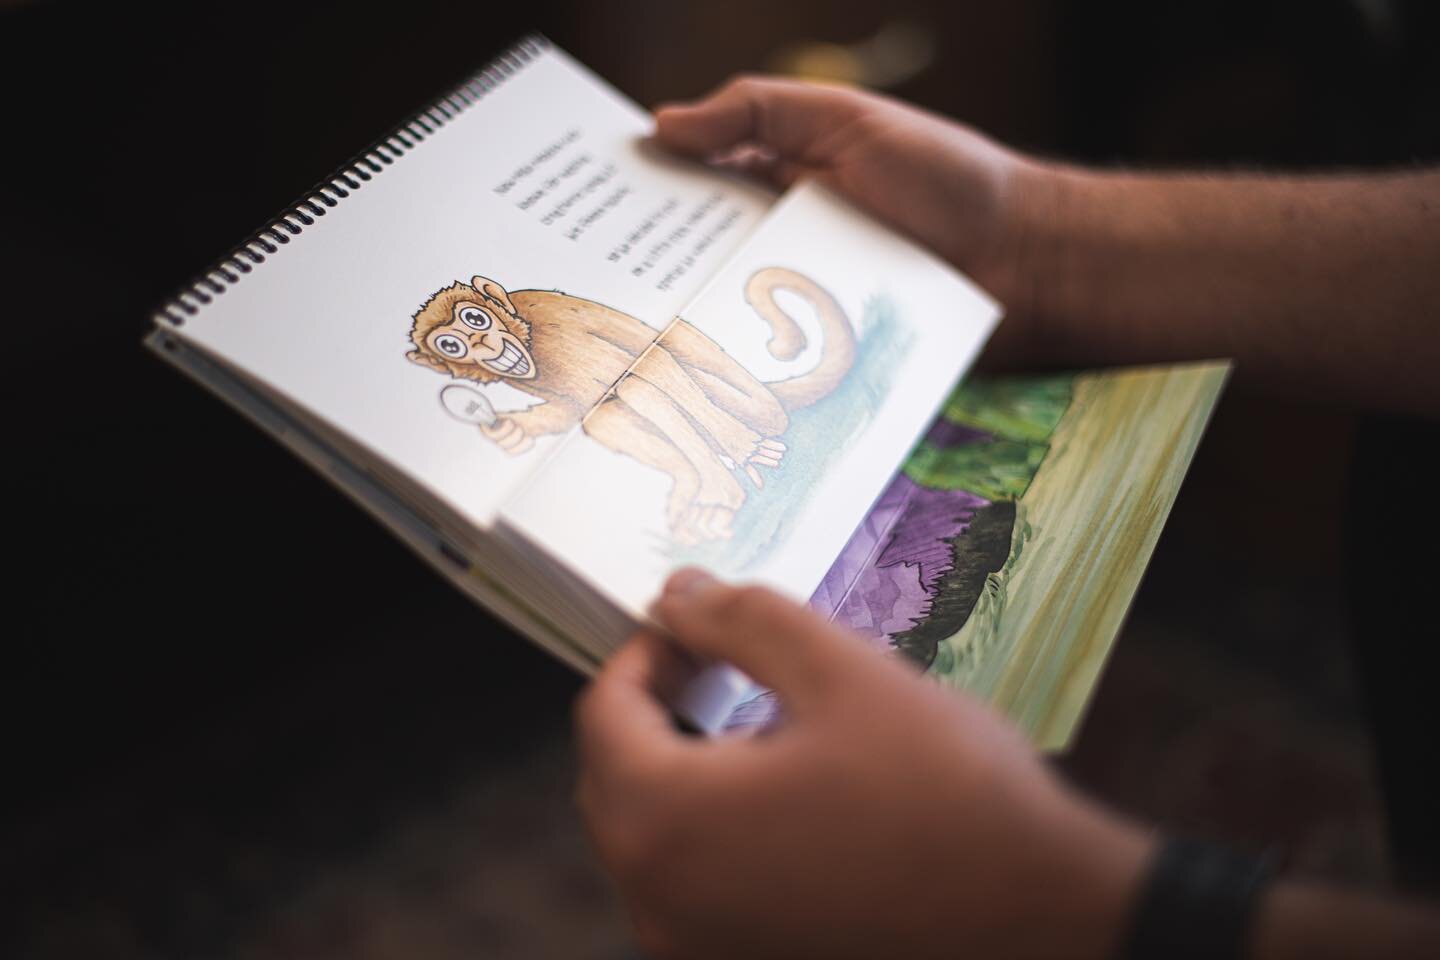 My favorite part about our book is watching each character change as you pull the page down! What&rsquo;s page is your favorite page or character?! #unfoldedfables #chloettacow #childrensbooks #author #illustrator #wallawallavalley